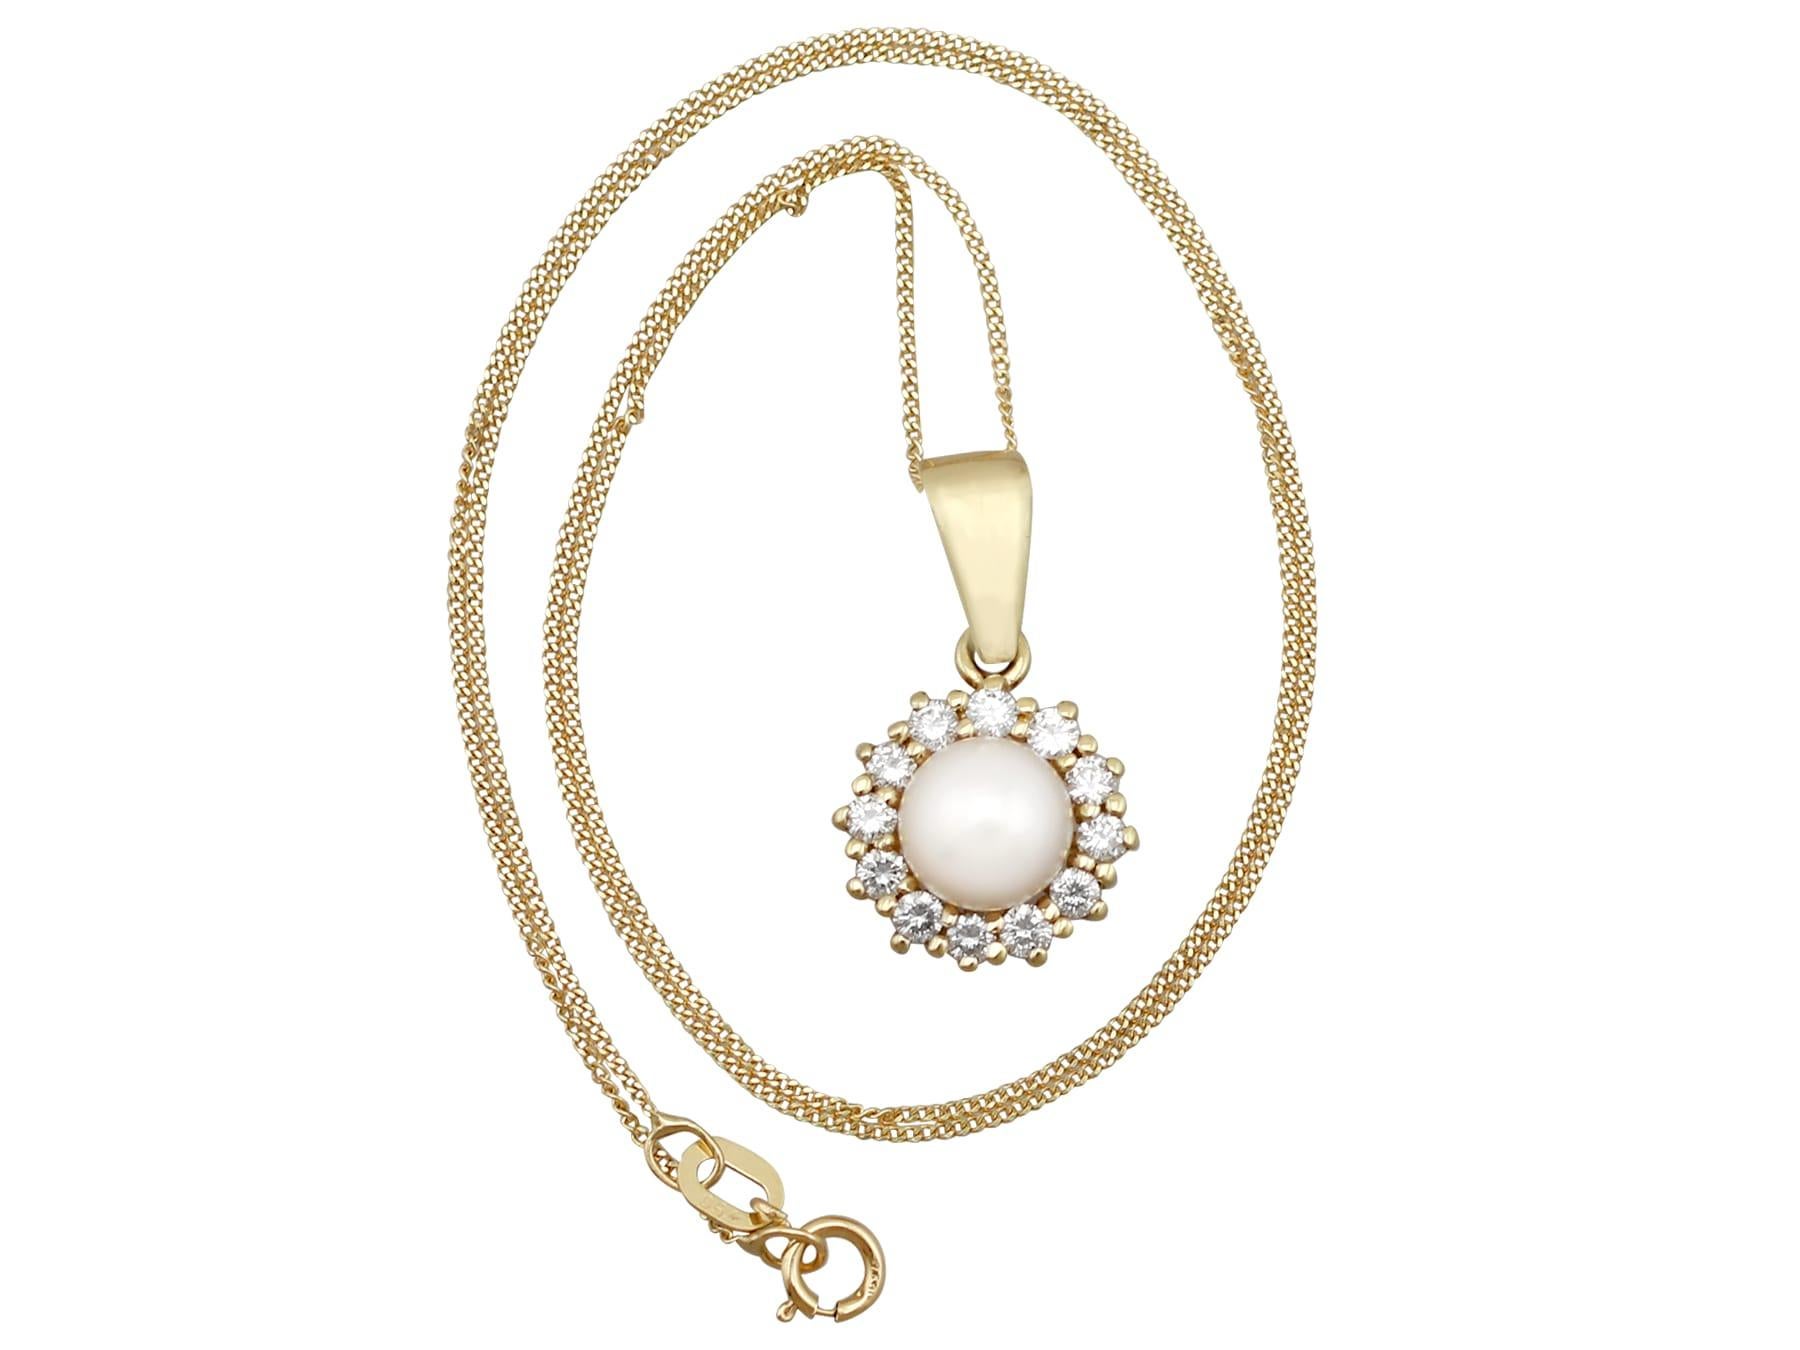 An impressive vintage 1970s cultured pearl and 0.48 carat diamond, 14 karat yellow gold pendant; part of our diverse pearl jewelry and estate jewelry collections.

This fine and impressive cultured pearl and diamond pendant has been crafted in 14k